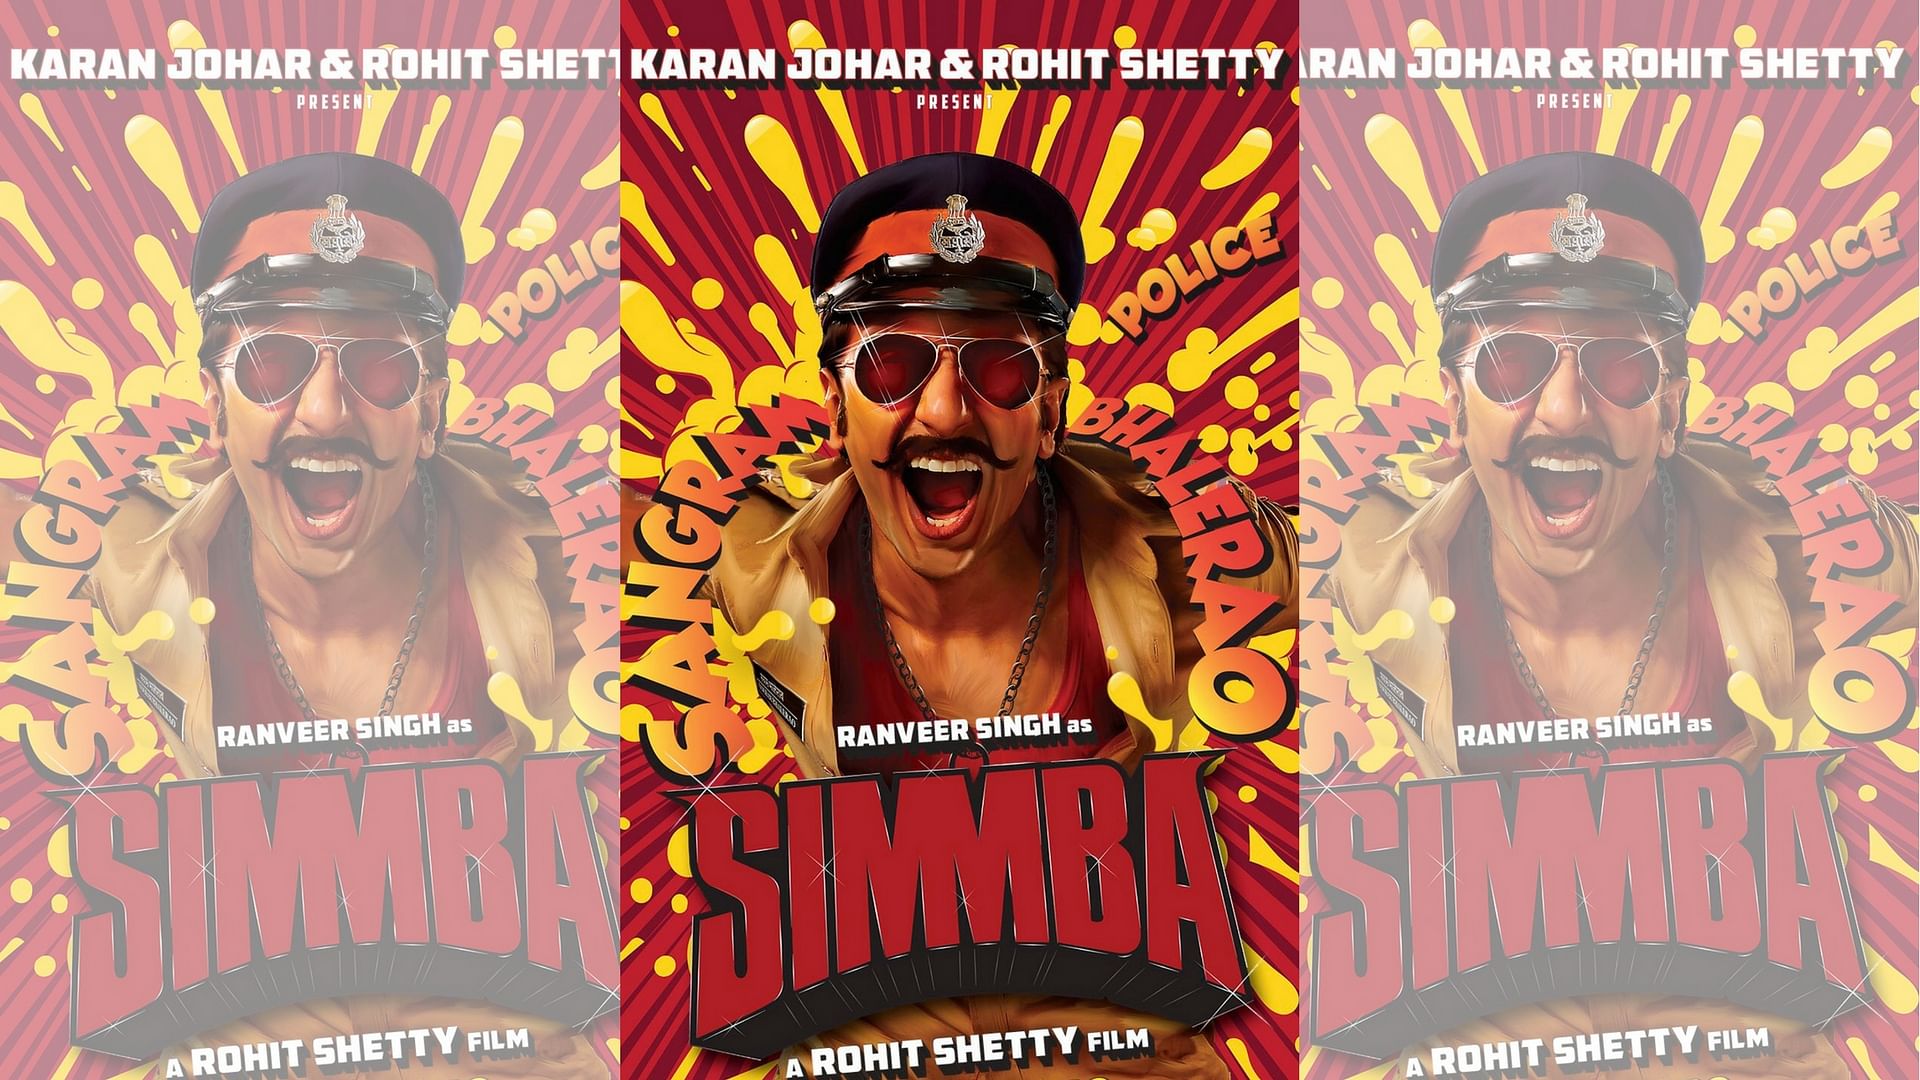 A company has filed a trademark infringement suit against <i>Simmba</i>.